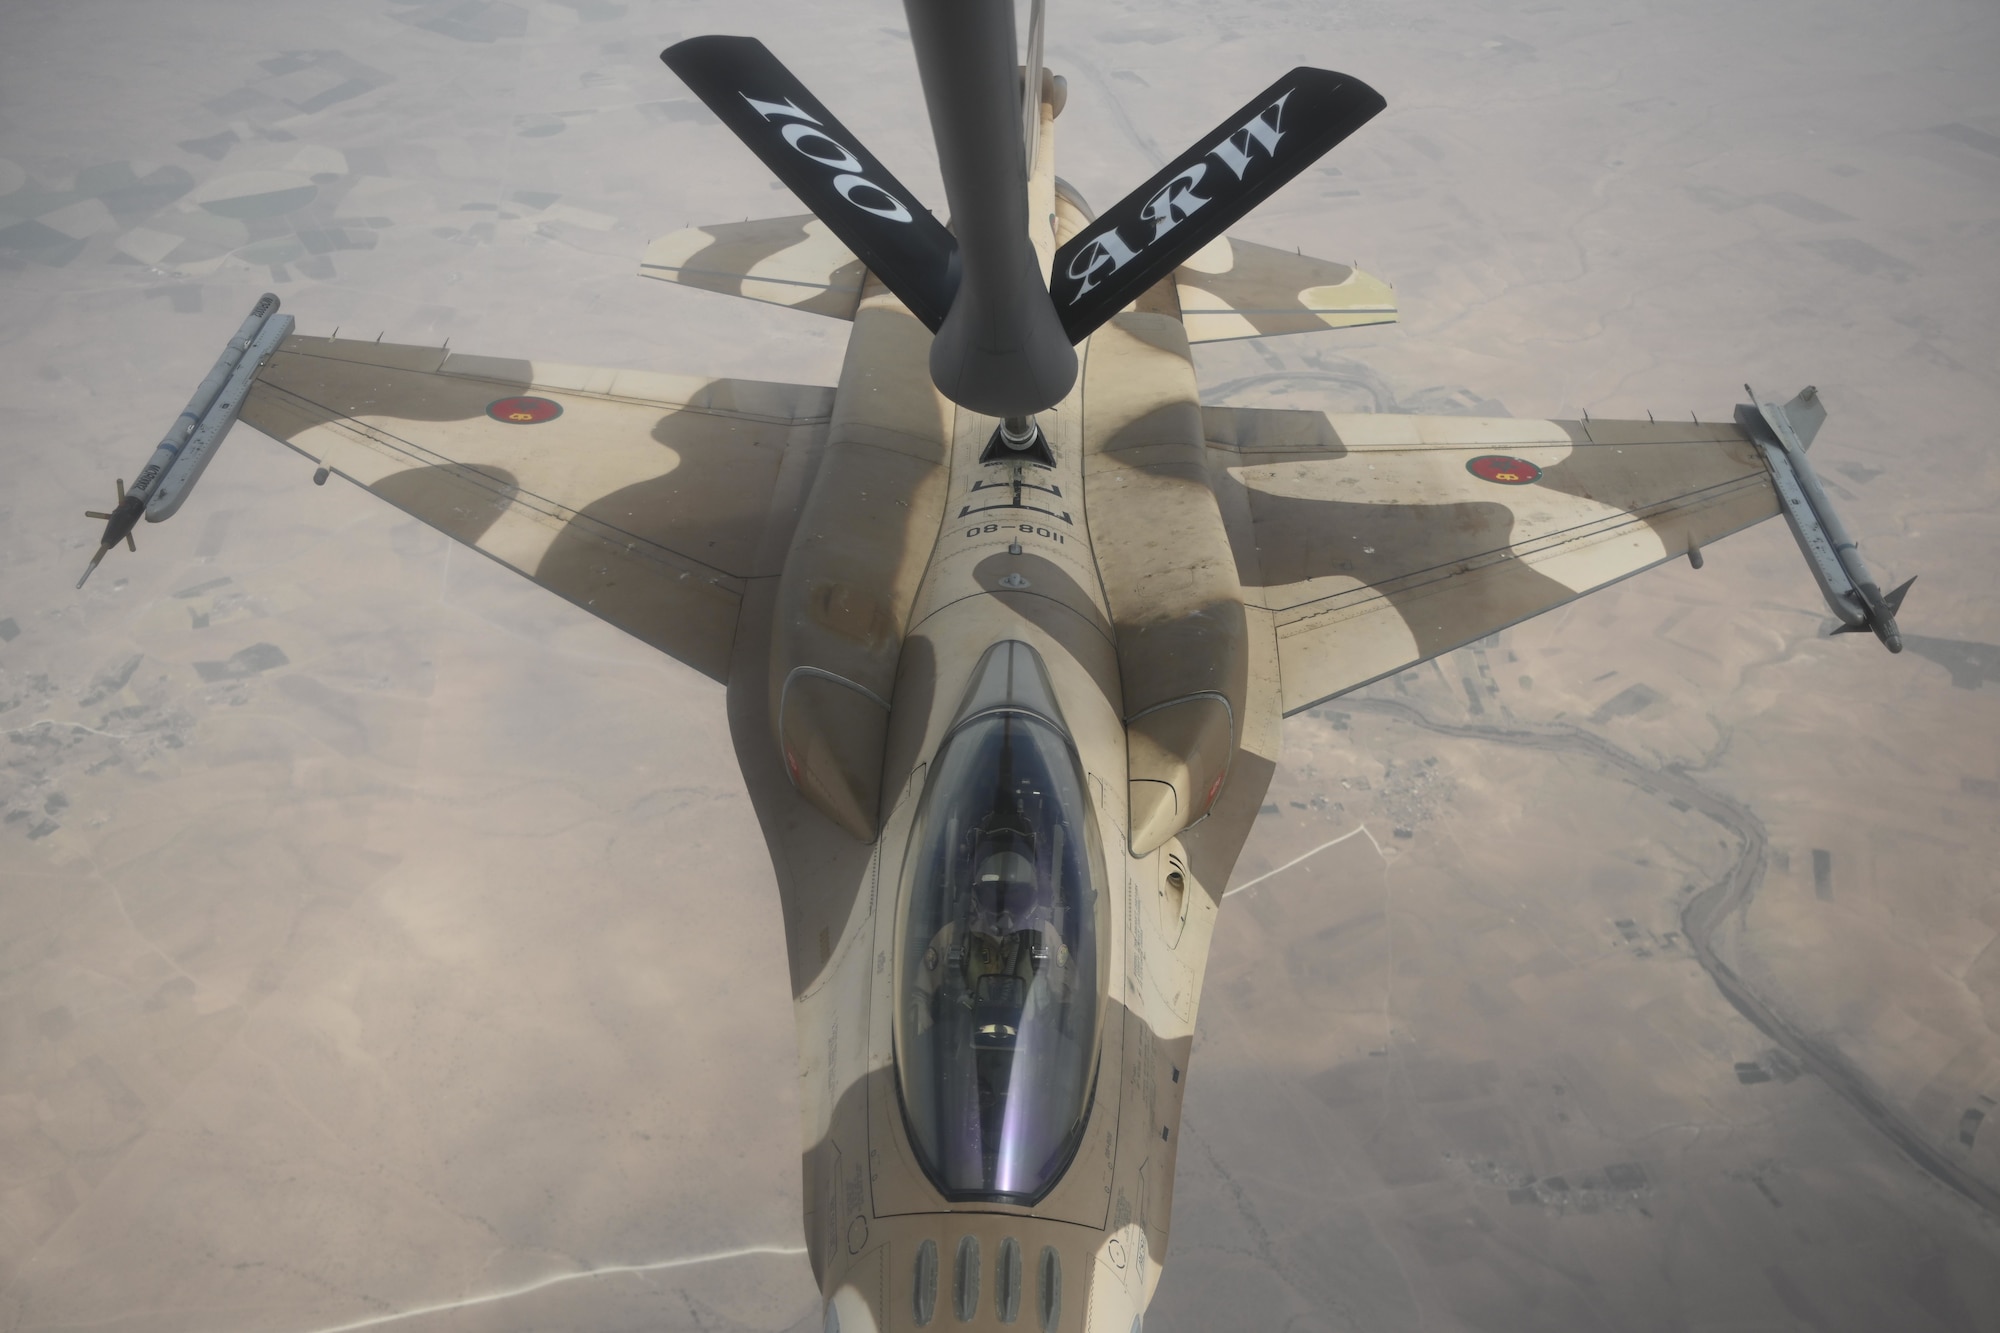 A Royal Moroccan Air Force  F-16 Fighting Falcon aircraft refuels with a U.S. Air Force KC-135 Stratotanker aircraft over Morocco during Exercise African Lion 2021, June 15, 2021. Conducting air refueling training with our partners is critical because the capability provides a “bridge” that allows the expeditionary Air Force to deploy around the globe at a moment’s notice.



African Lion is U.S. Africa Command's largest, premier, joint, annual exercise hosted by Morocco, Tunisia and Senegal, 7-18 June. More than 7,000 participants from nine nations and NATO train together with a focus on enhancing readiness for U.S. and partner nation forces. African Lion is a multi-domain, multi-component, and multi-national exercise, which employs a full array of mission capabilities with the goal to strengthen interoperability among participants. (U.S. Air Force photo by Senior Airman Joseph Barron)